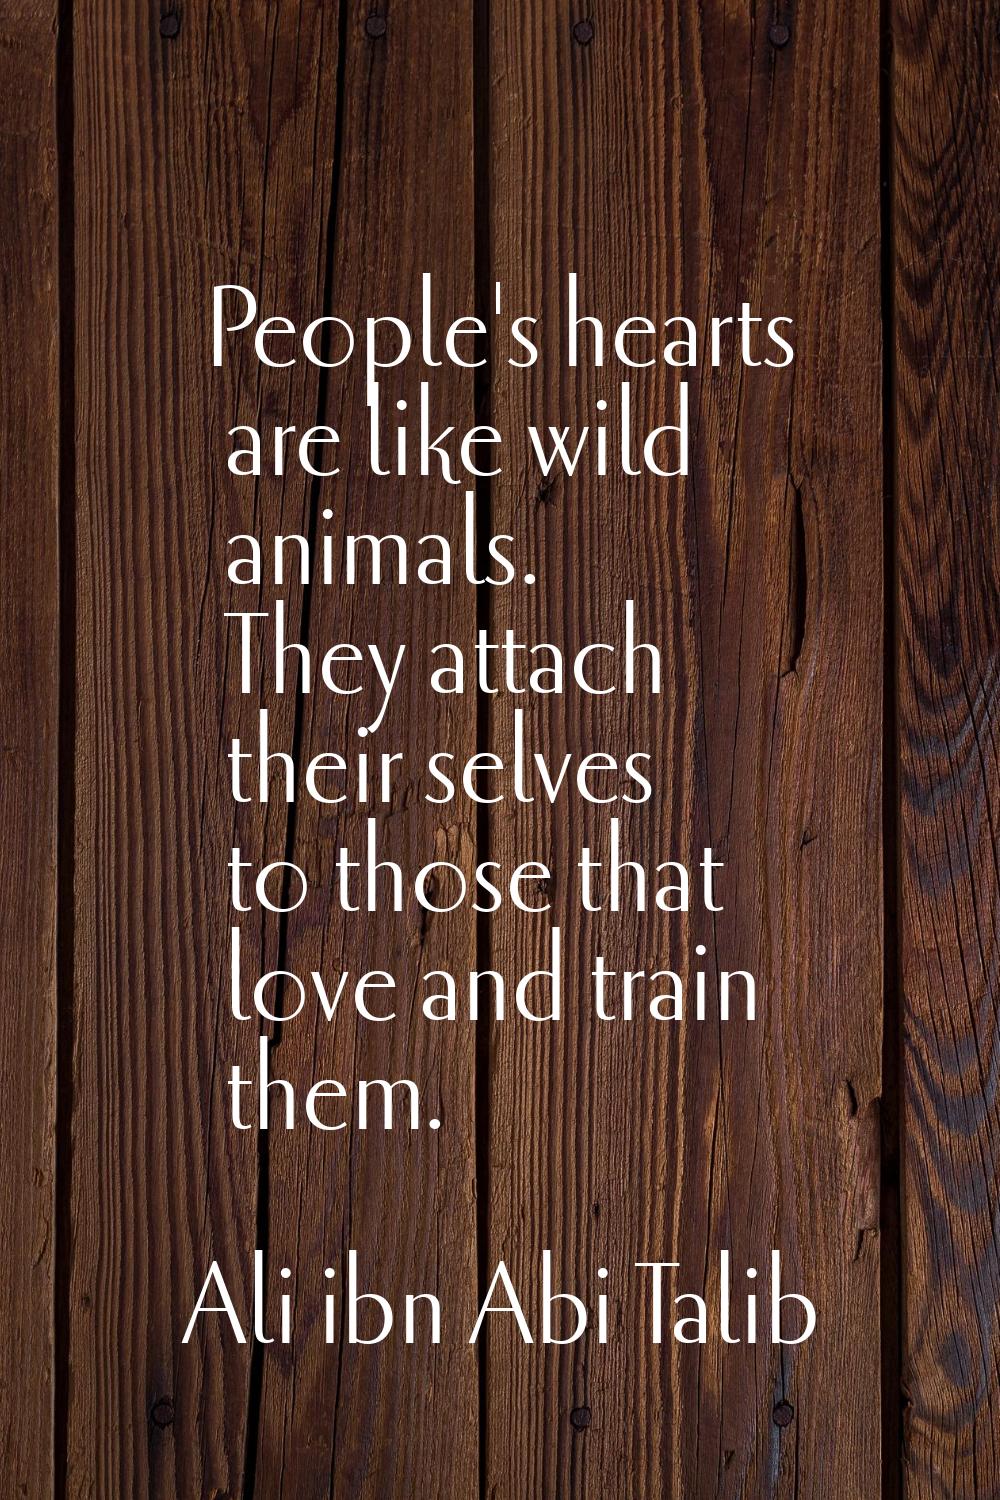 People's hearts are like wild animals. They attach their selves to those that love and train them.